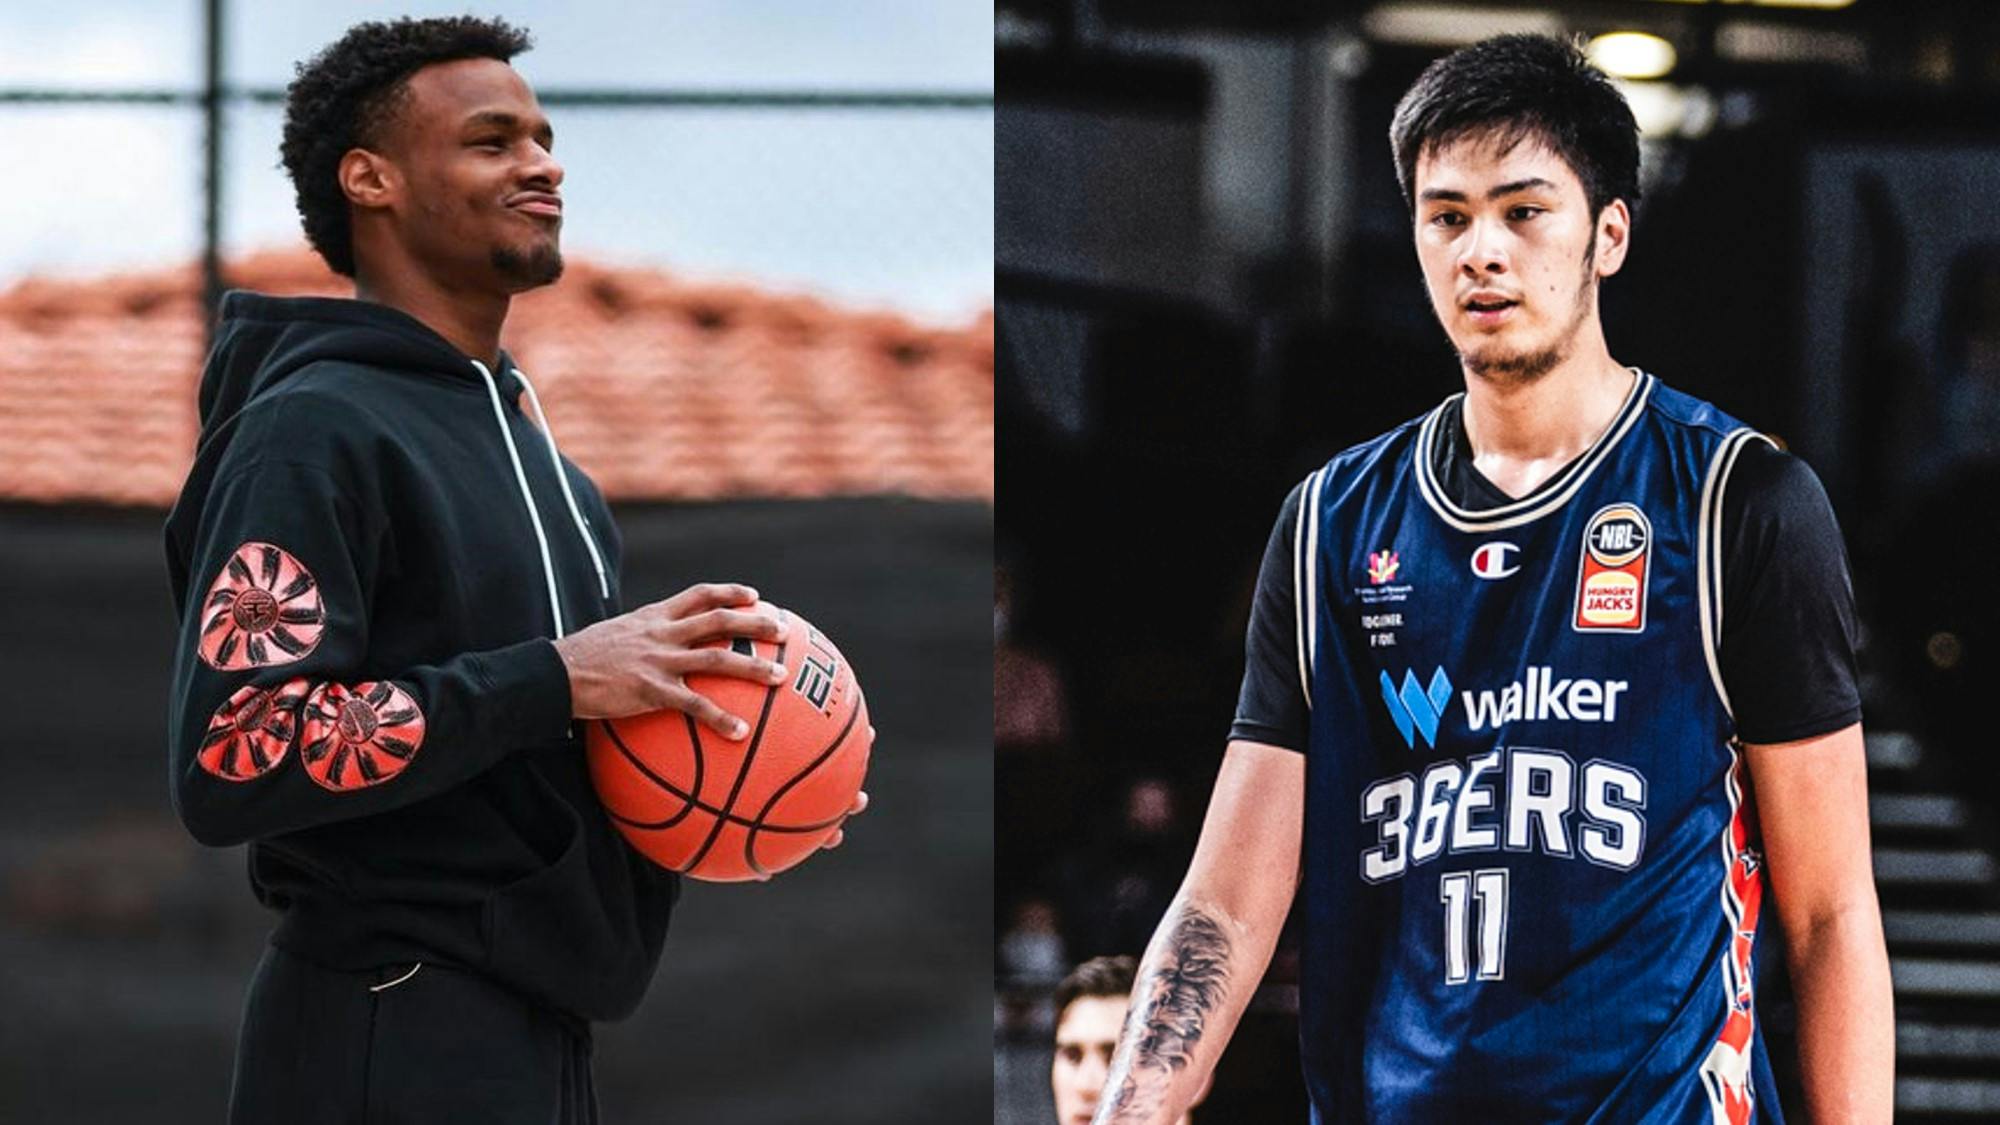 LOOK: Team Ignite without Kai Sotto in jersey reveal